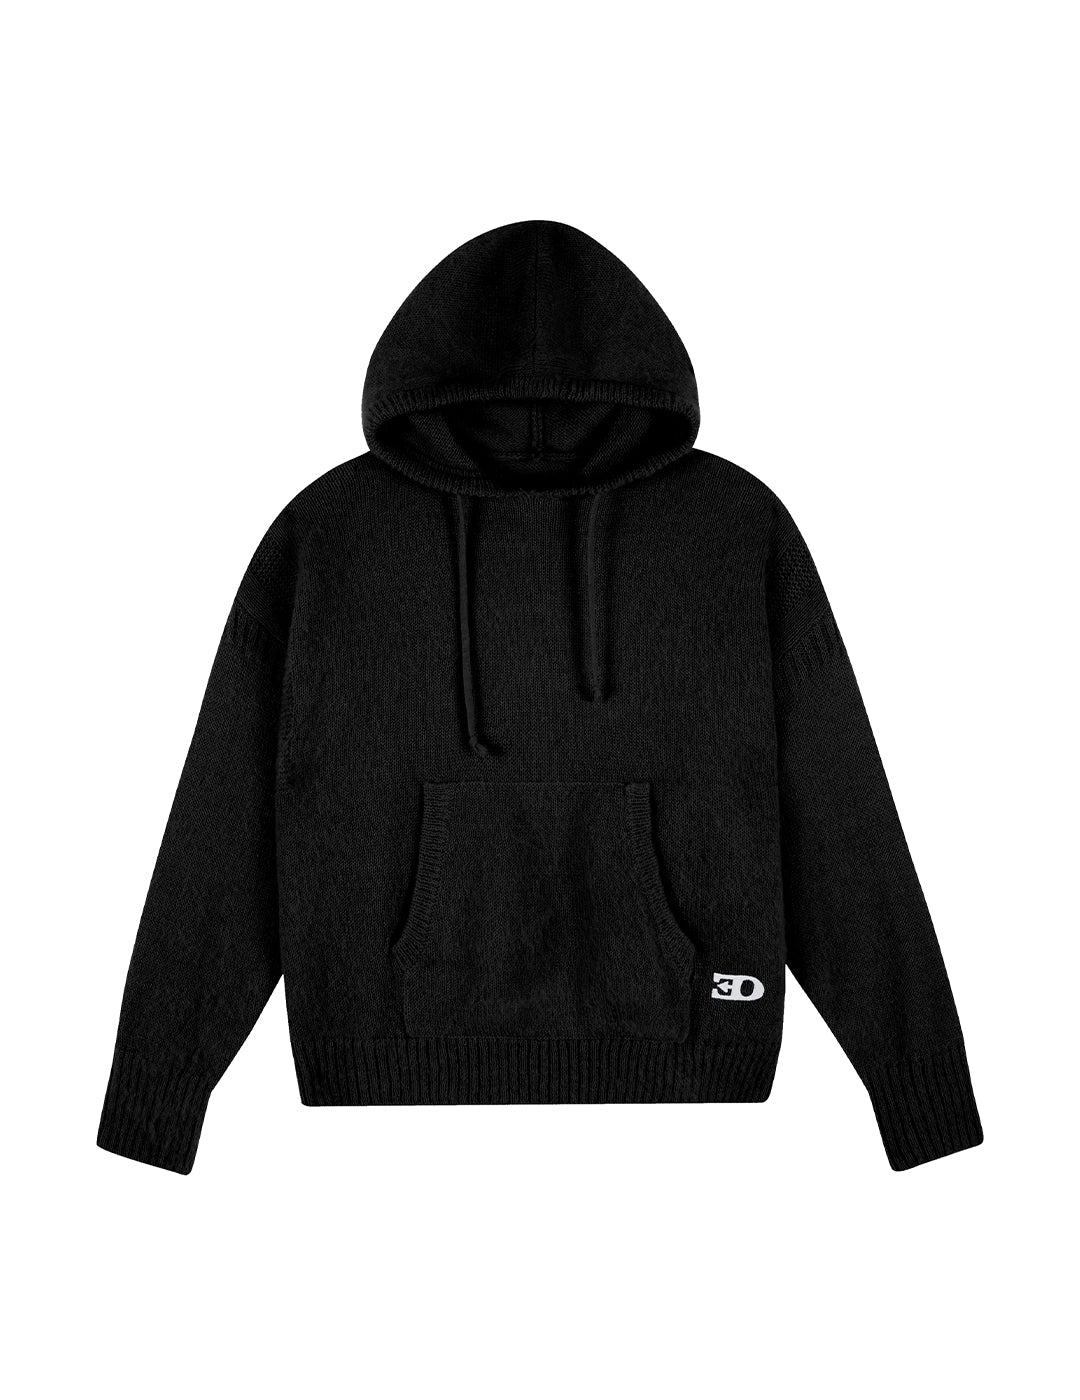 THE GUERNSEY HOODIE IN BLACK MOHAIR